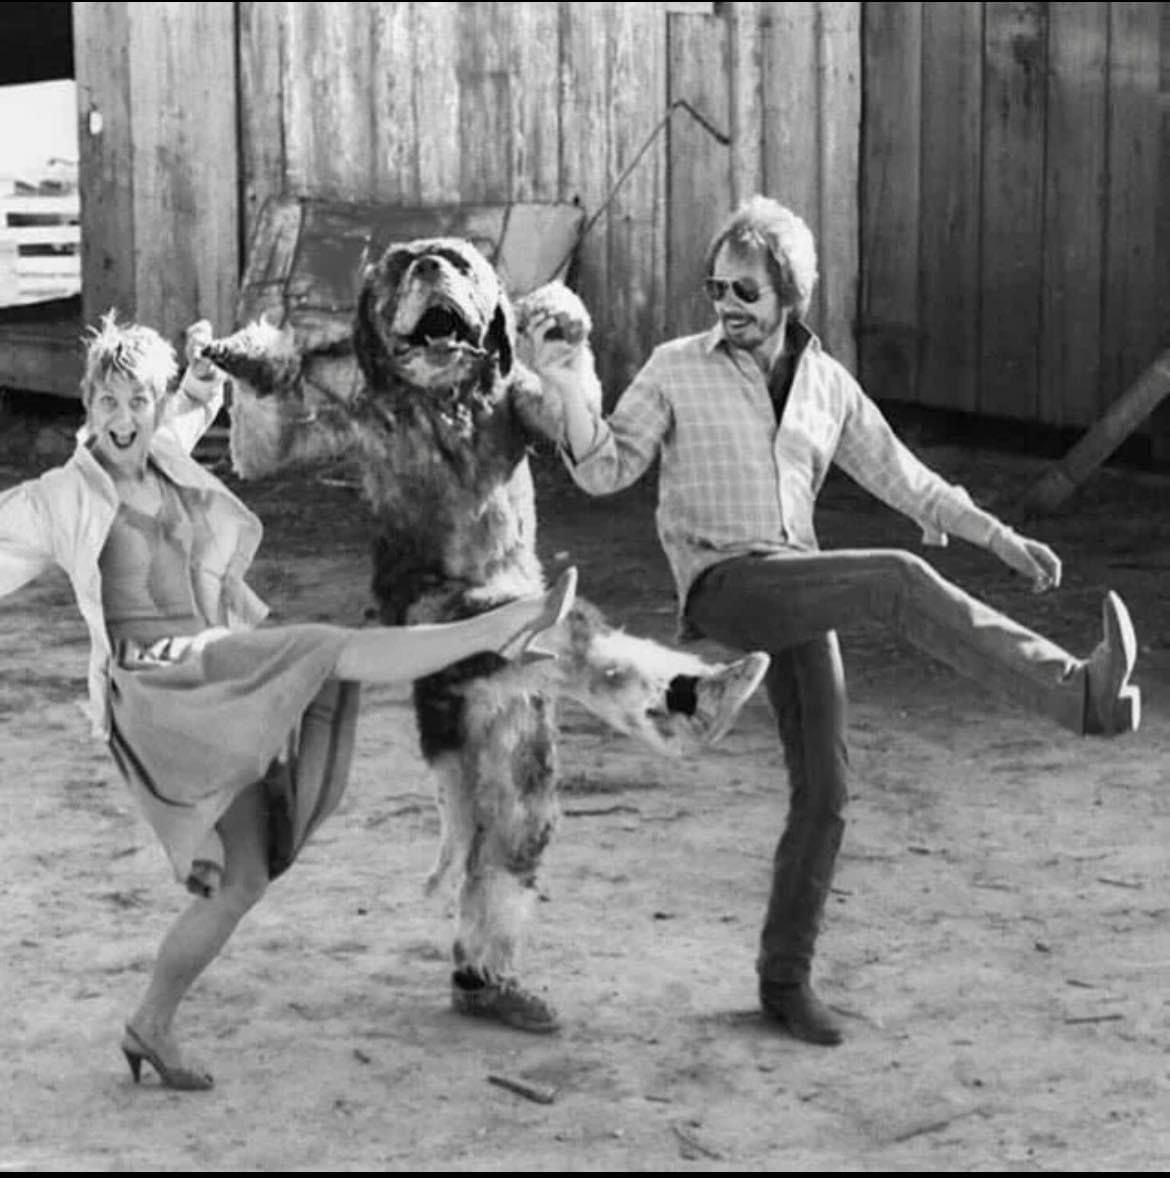 All fun and games on the set of #cujo #behindthescenes🎬 1983